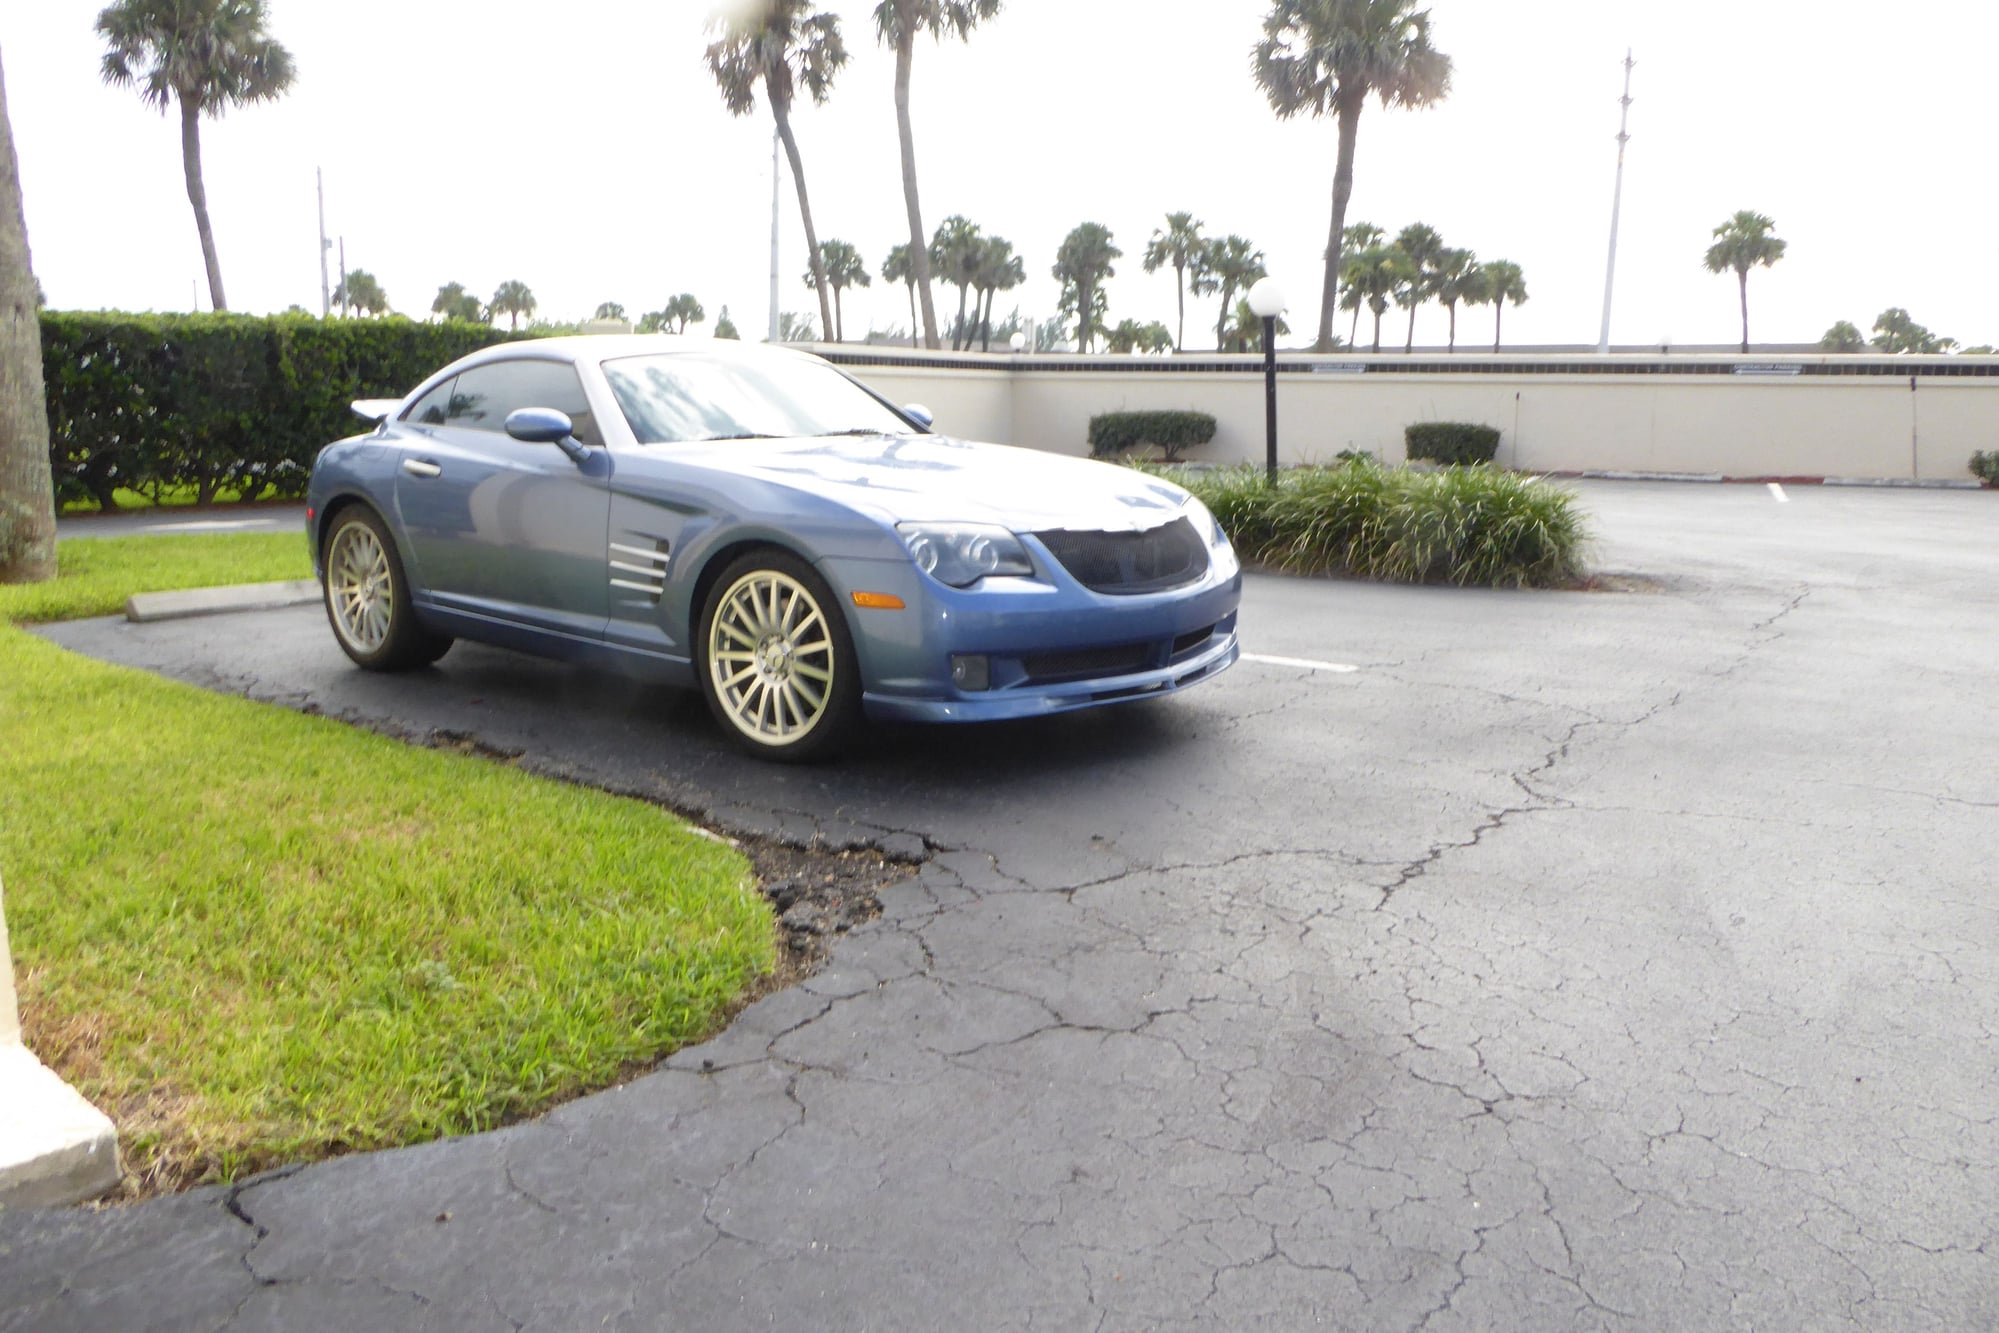 2005 Chrysler Crossfire - If there is one srt6 you want, it is this one, Aero Blue loaded with mods - Used - VIN 1C3AN79N65X050305 - 109,500 Miles - 6 cyl - 2WD - Automatic - Coupe - Blue - Indialantic, FL 32903, United States